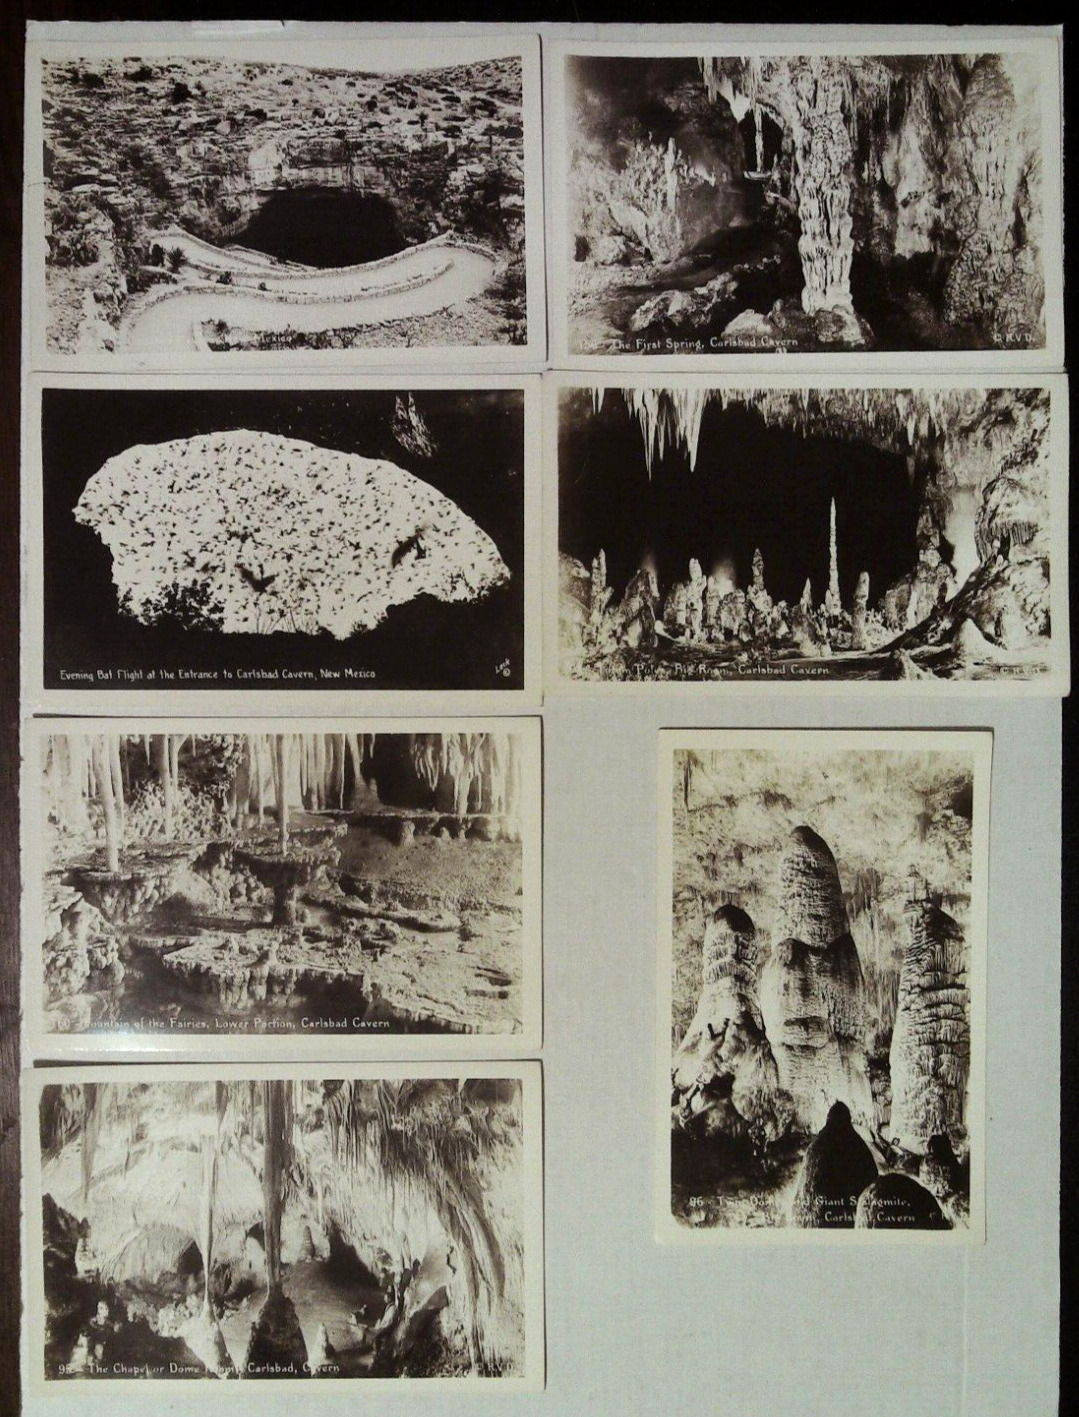 1930's CARLSBAD CAVERNS NEW MEXICO REAL PHOTO POSTCARD LOT 9 POSTCARDS